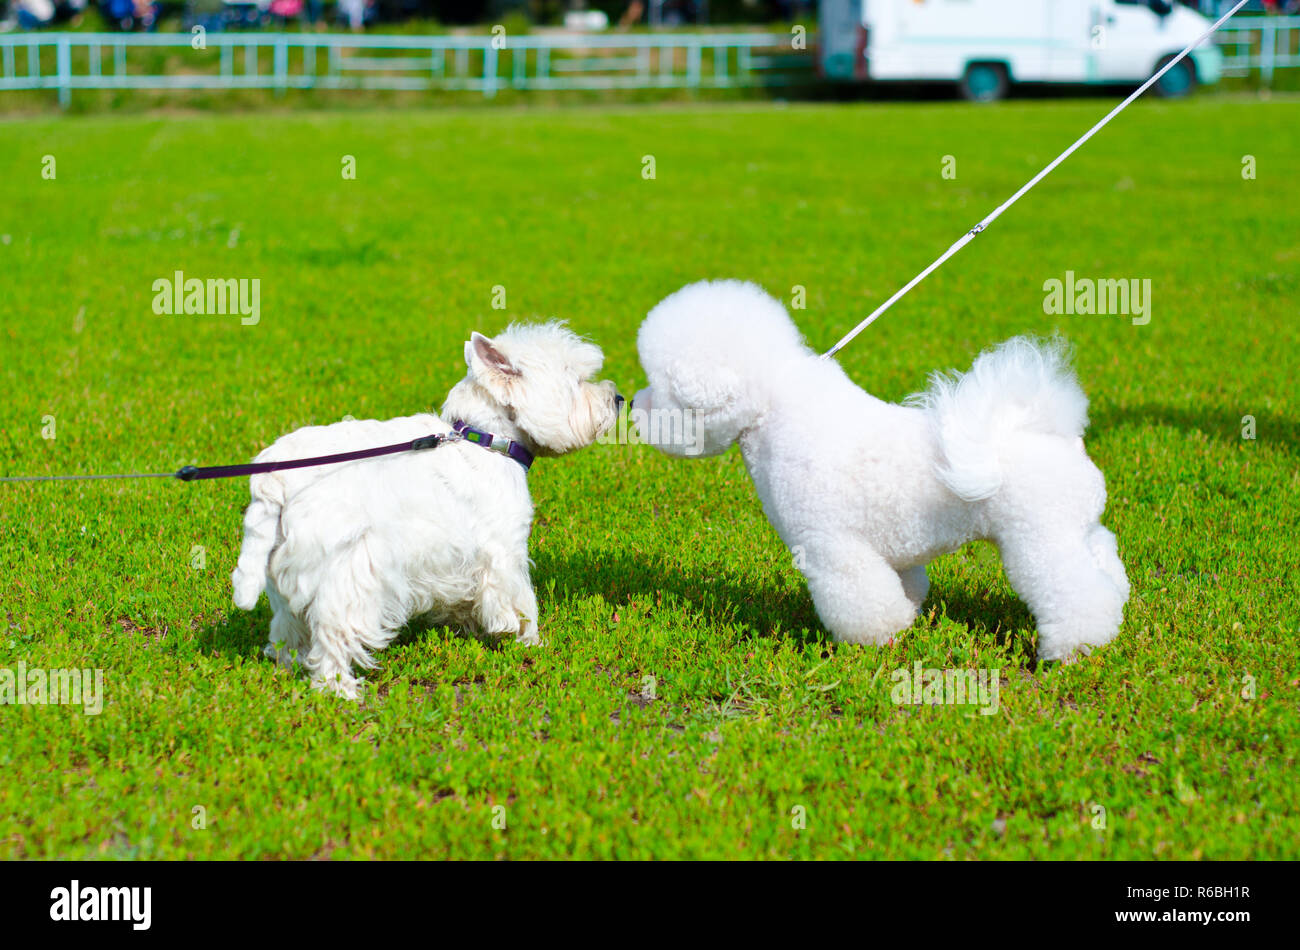 two dogs on a green grass outdoors Stock Photo